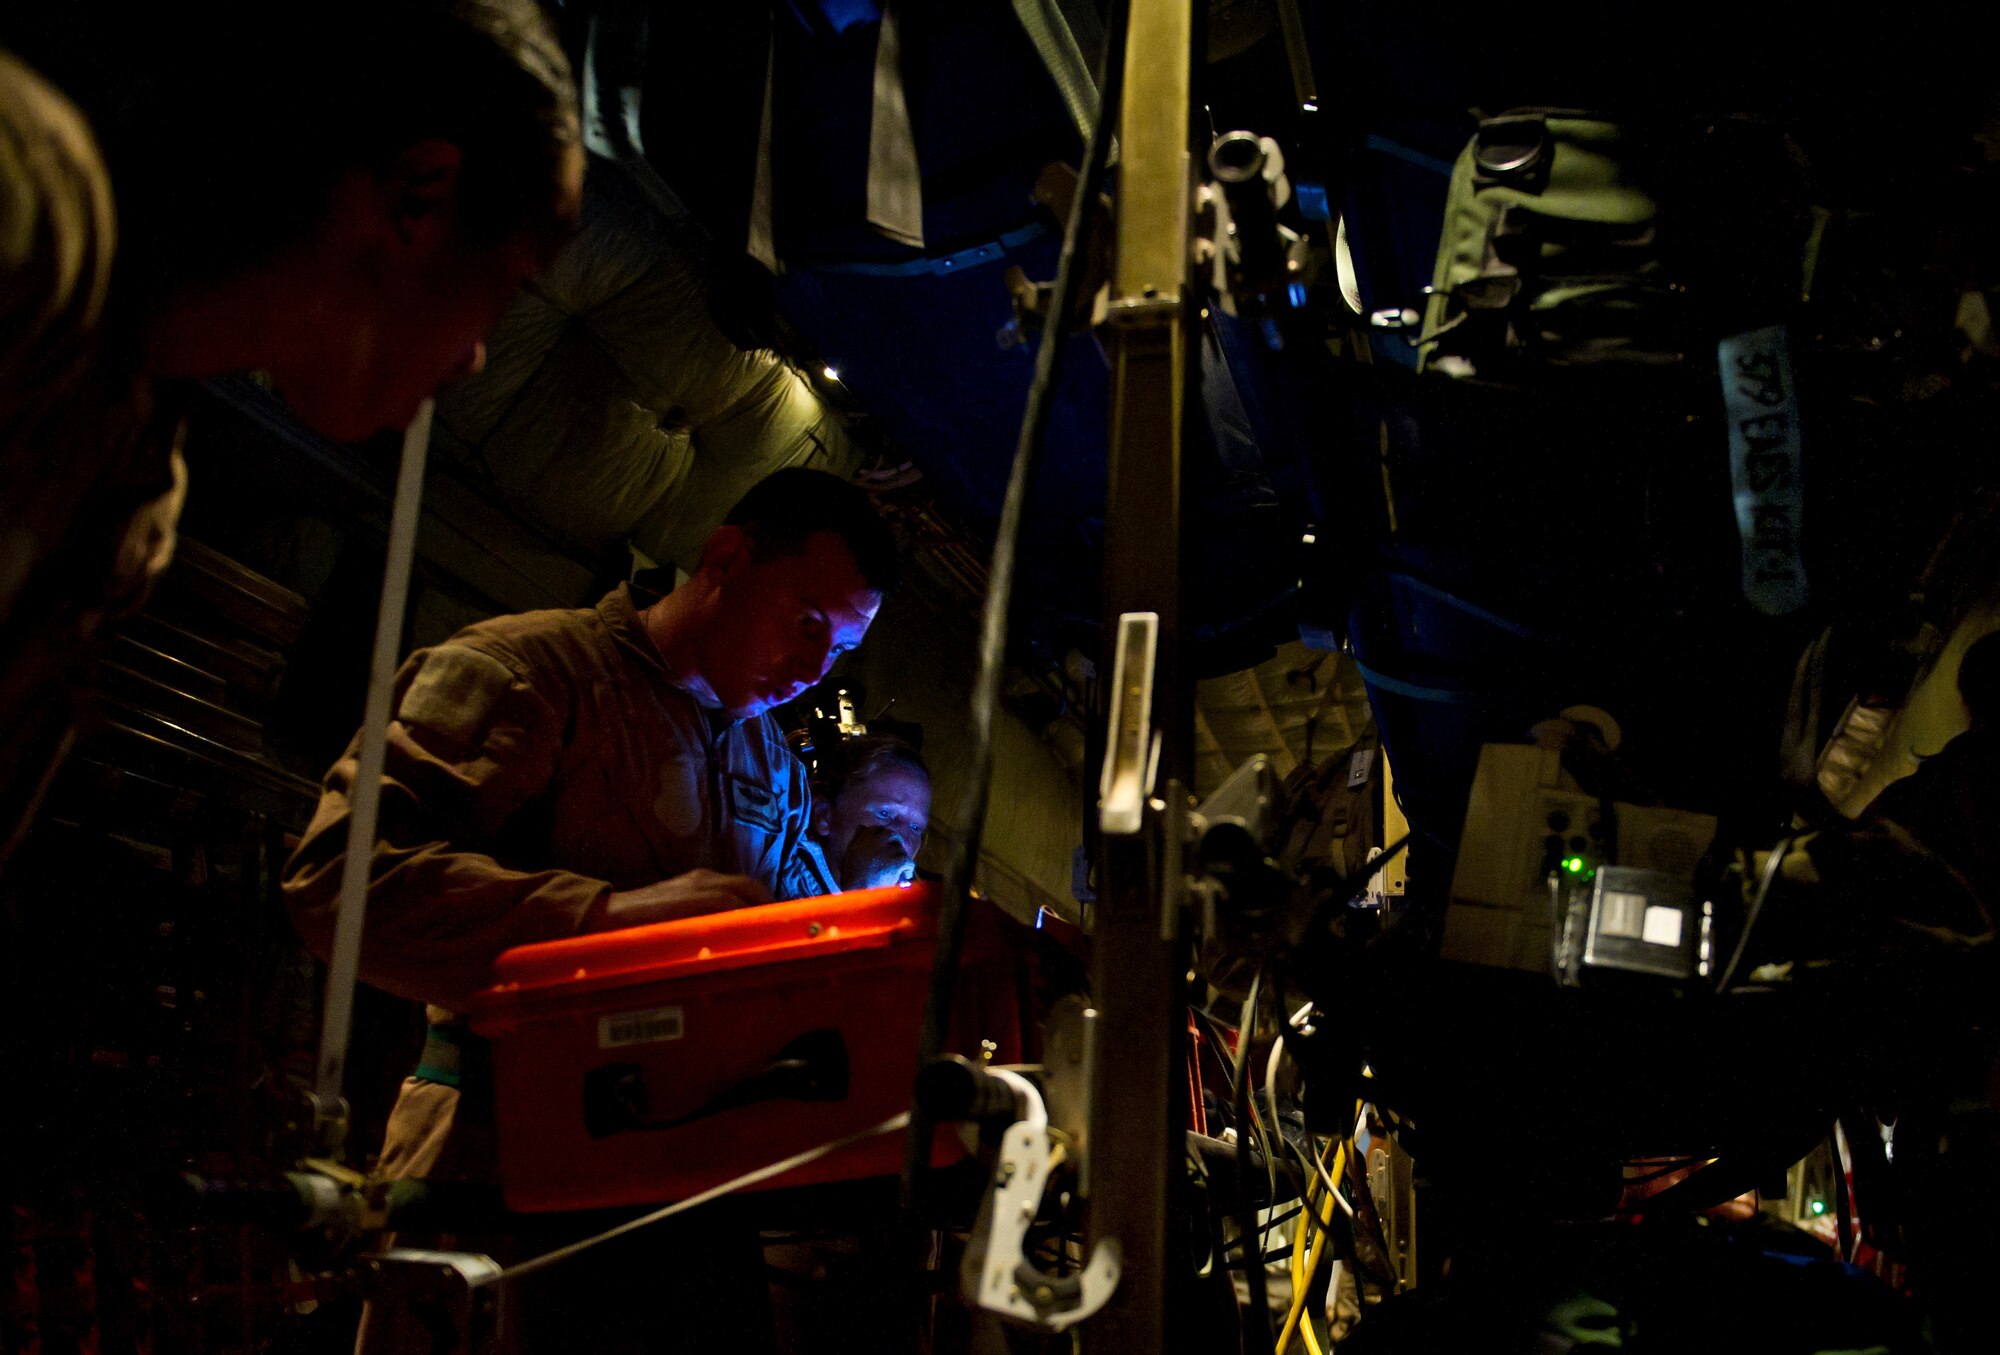 U.S. Air Force Senior Airman Christopher Rowland, 379th Expeditionary Aeromedical Evacuation Squadron medical technician, checks medical equipment on a C-130 Hercules before an aeromedical evacuation mission, July 19, 2013, at an undisclosed location in Southwest Asia. The EAES teams are needed to transport patients to medical facilities from remote deployed locations for additional treatment. Rowland, a native of Jacksonville, Fla., is deployed from the 18th Aeromedical Evacuation Squadron, Kadena Air Base, Okianwa, Japan. (U.S. Air Force photo/Staff Sgt. Marleah Miller)